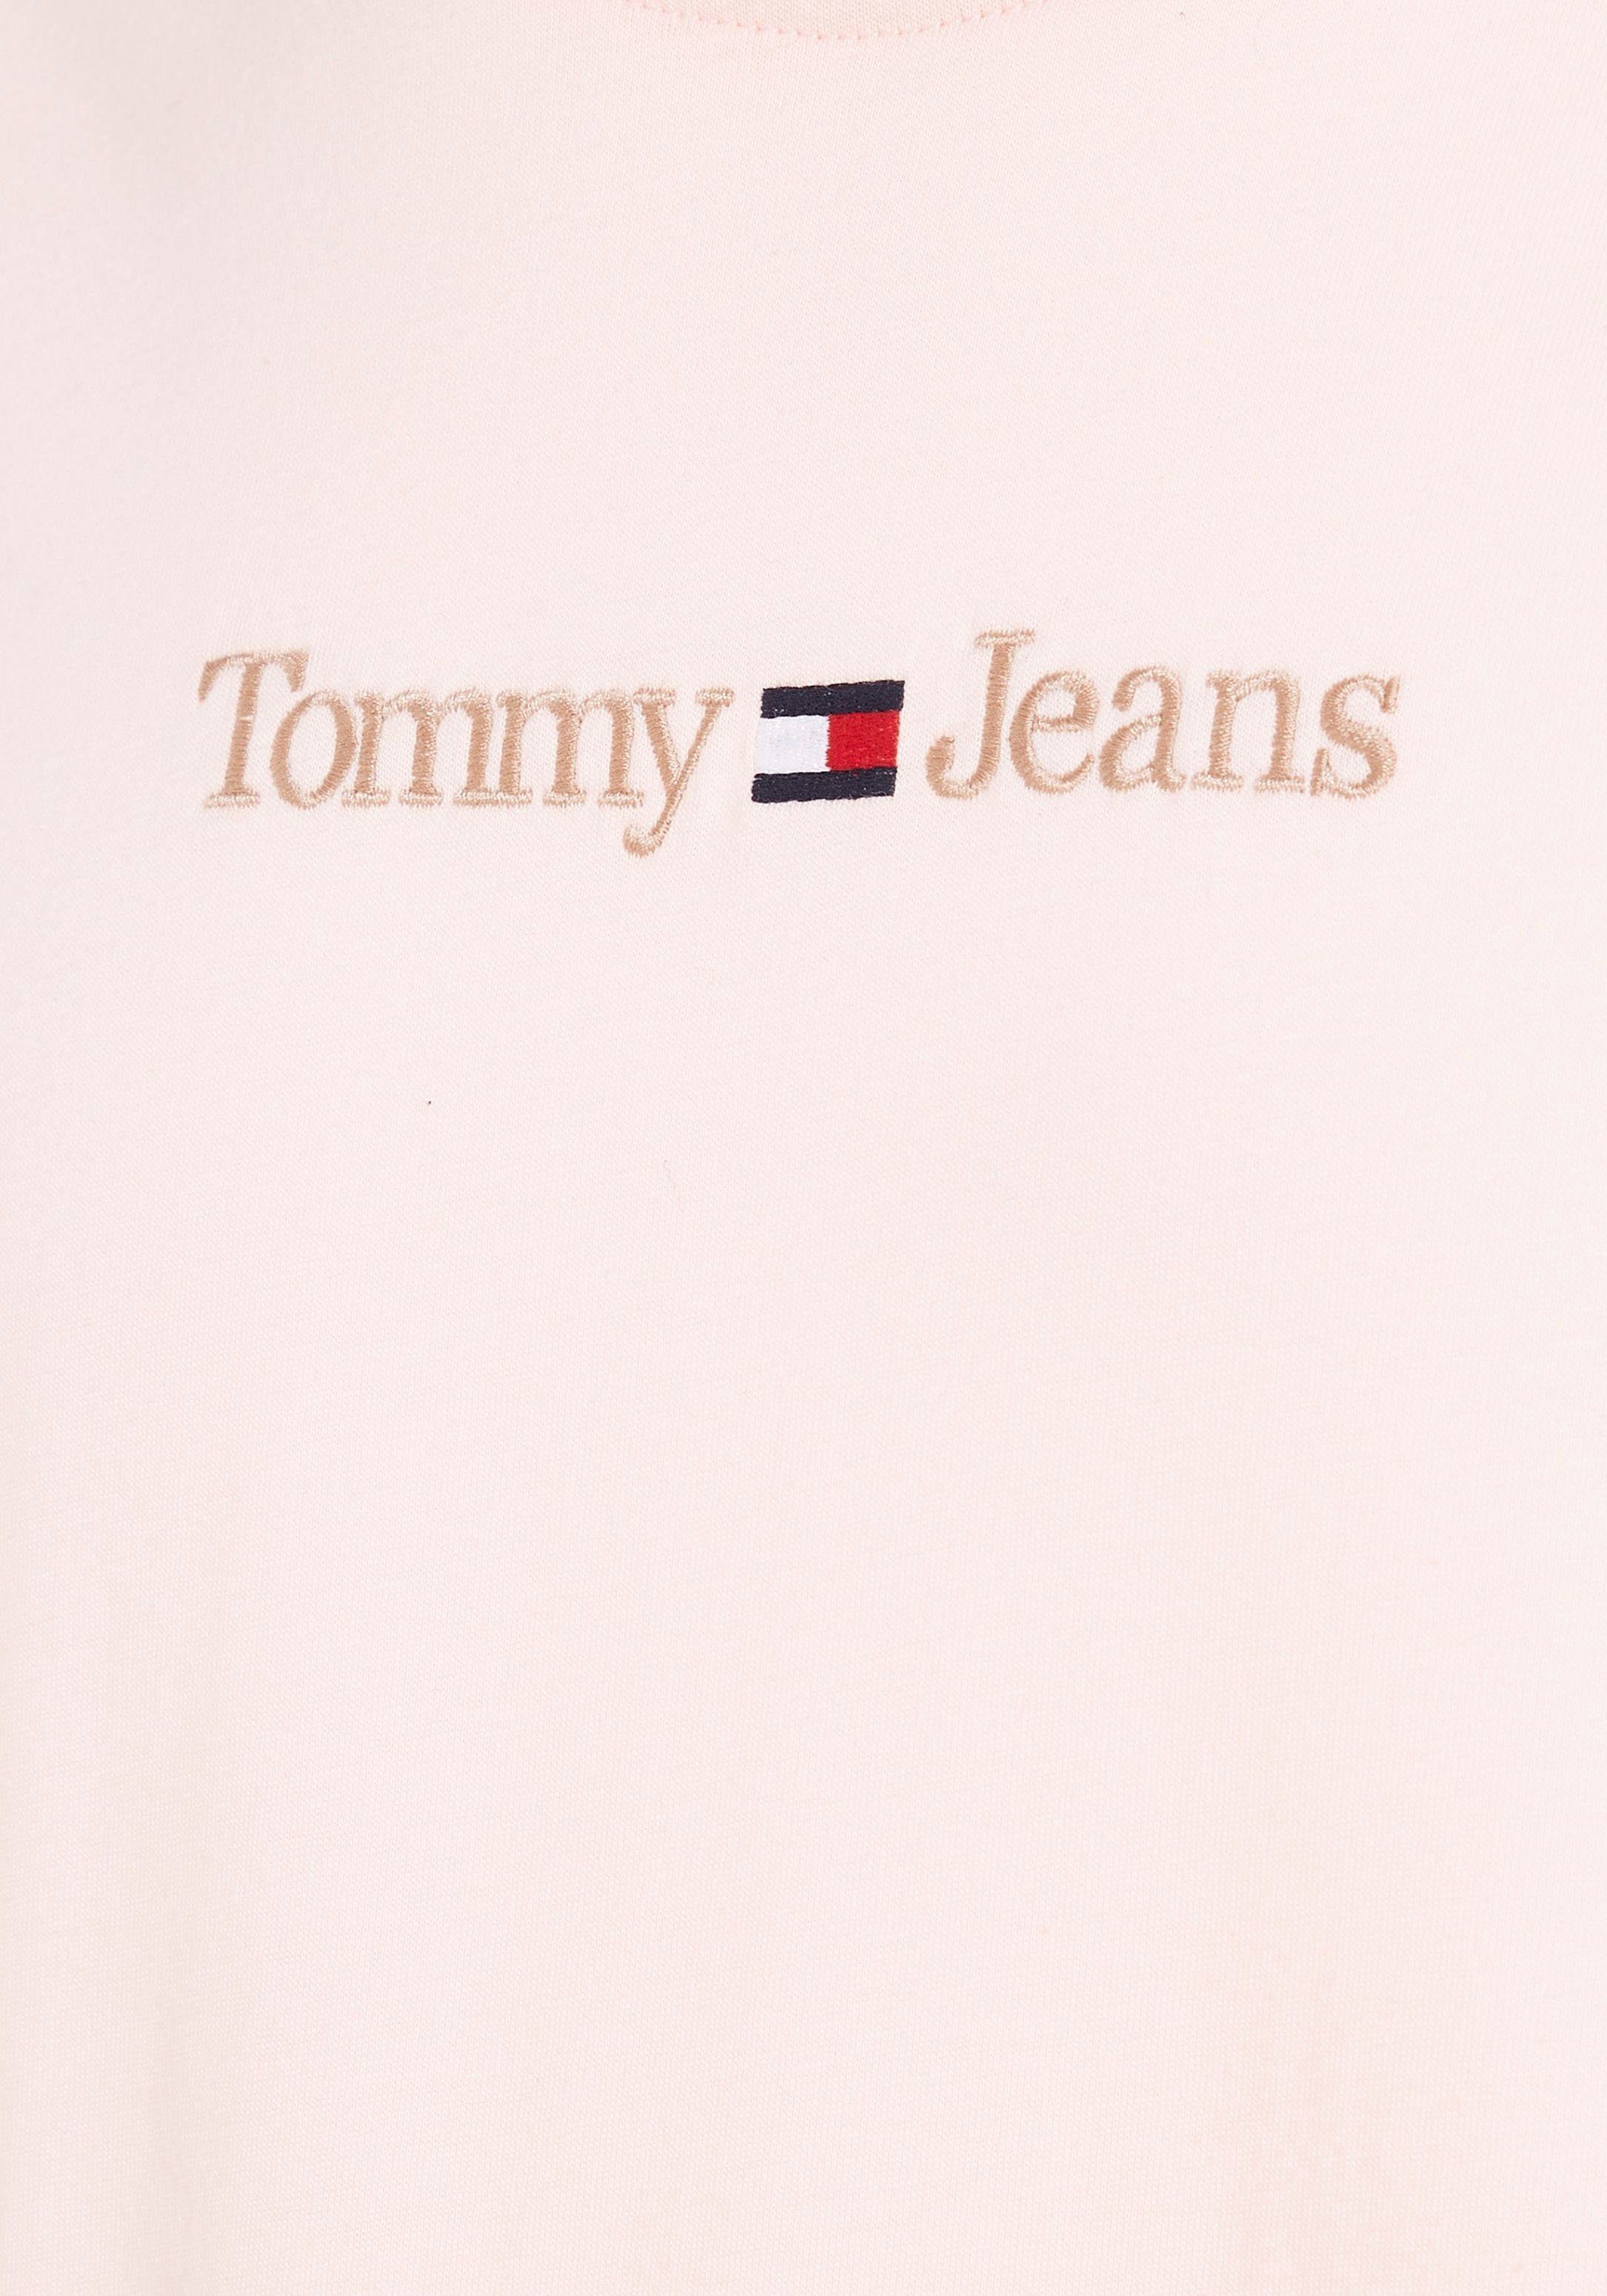 TJM CLSC Faint SMALL Jeans T-Shirt TEXT Pink TEE Tommy